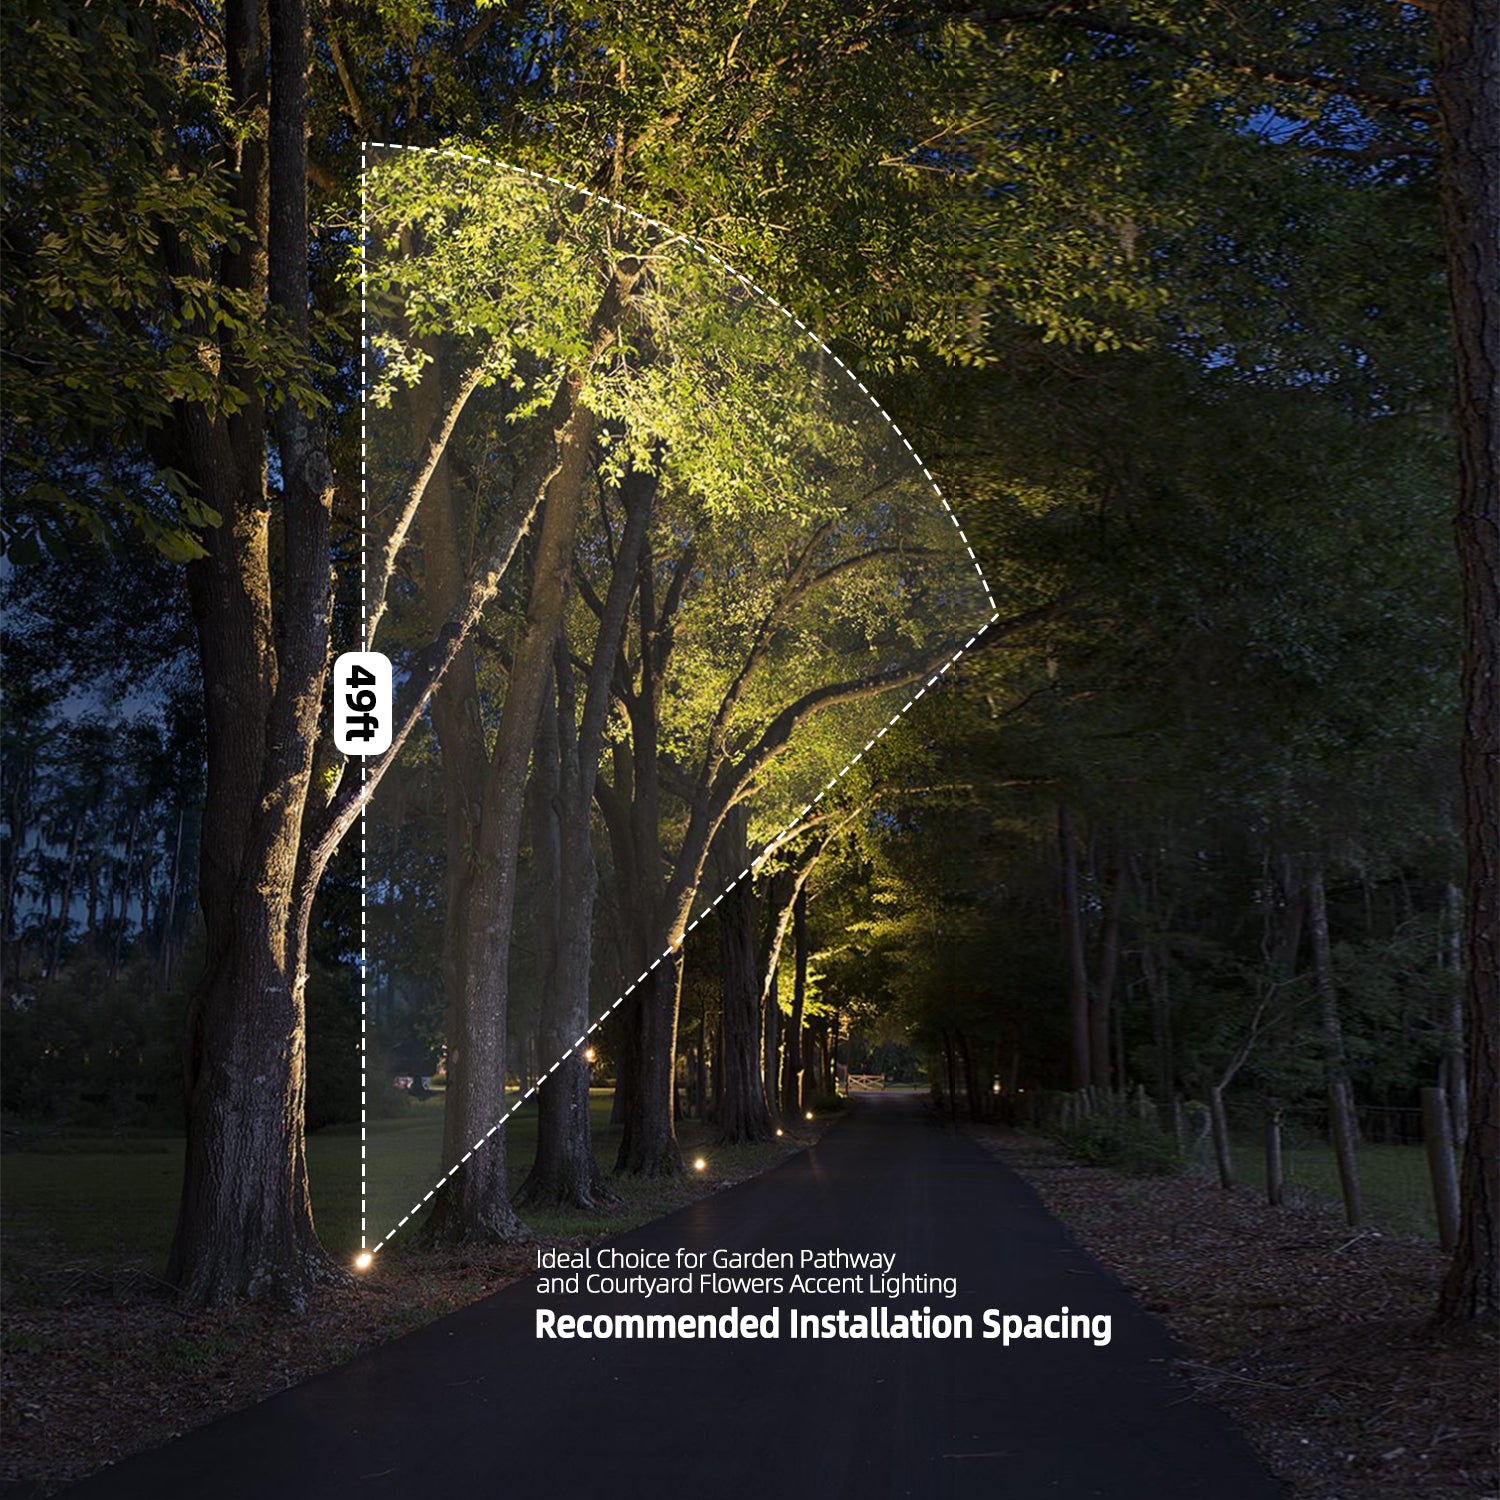 Night scene with tree-lined path illuminated by LED brass landscape spotlights, demonstrating light spread up to 40 feet, recommended for garden pathways and courtyard lighting COA101B